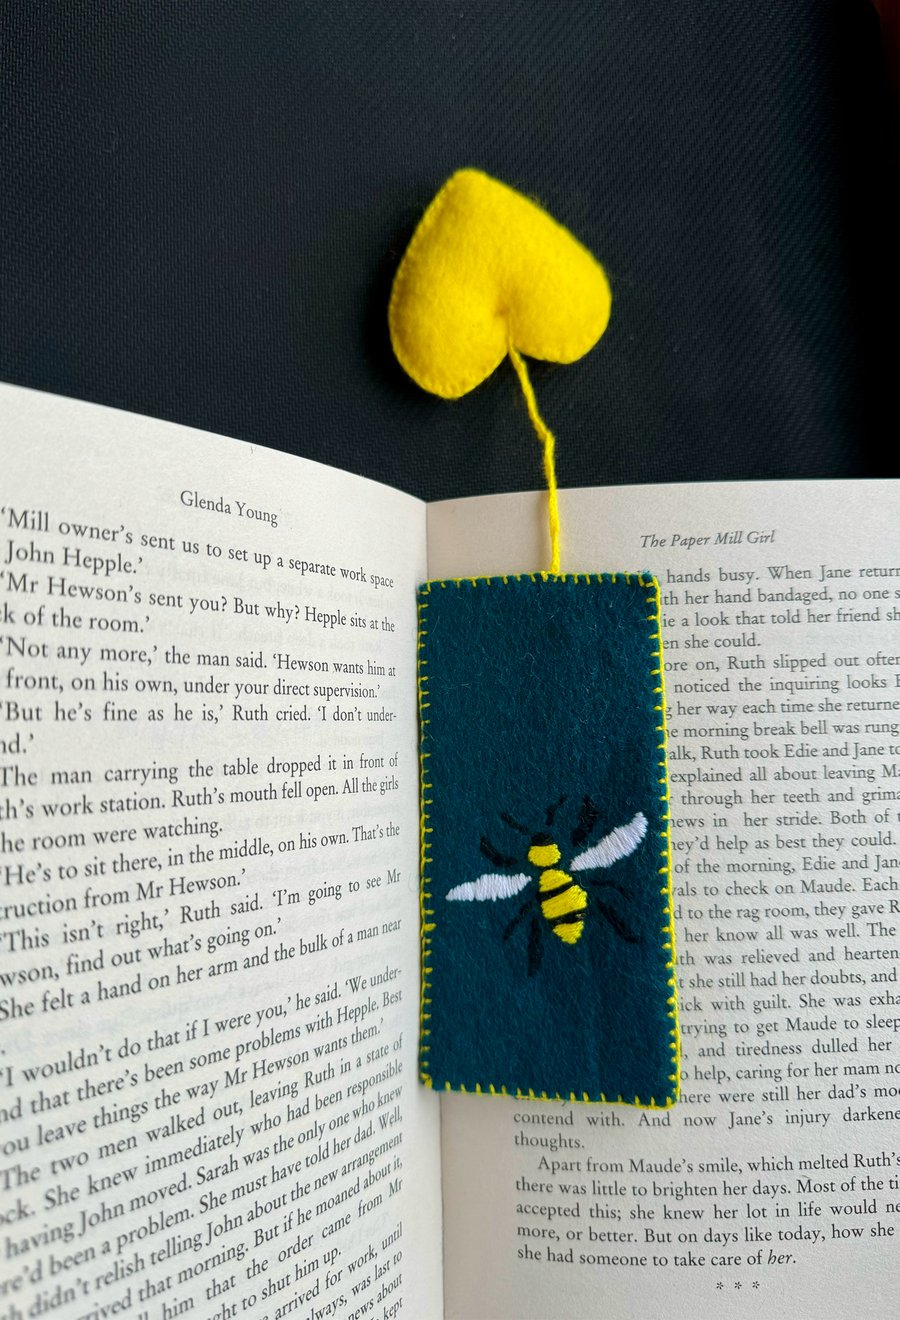 Bee wool felt hand embroidered heart tassel bookmark  gift for booklover readers